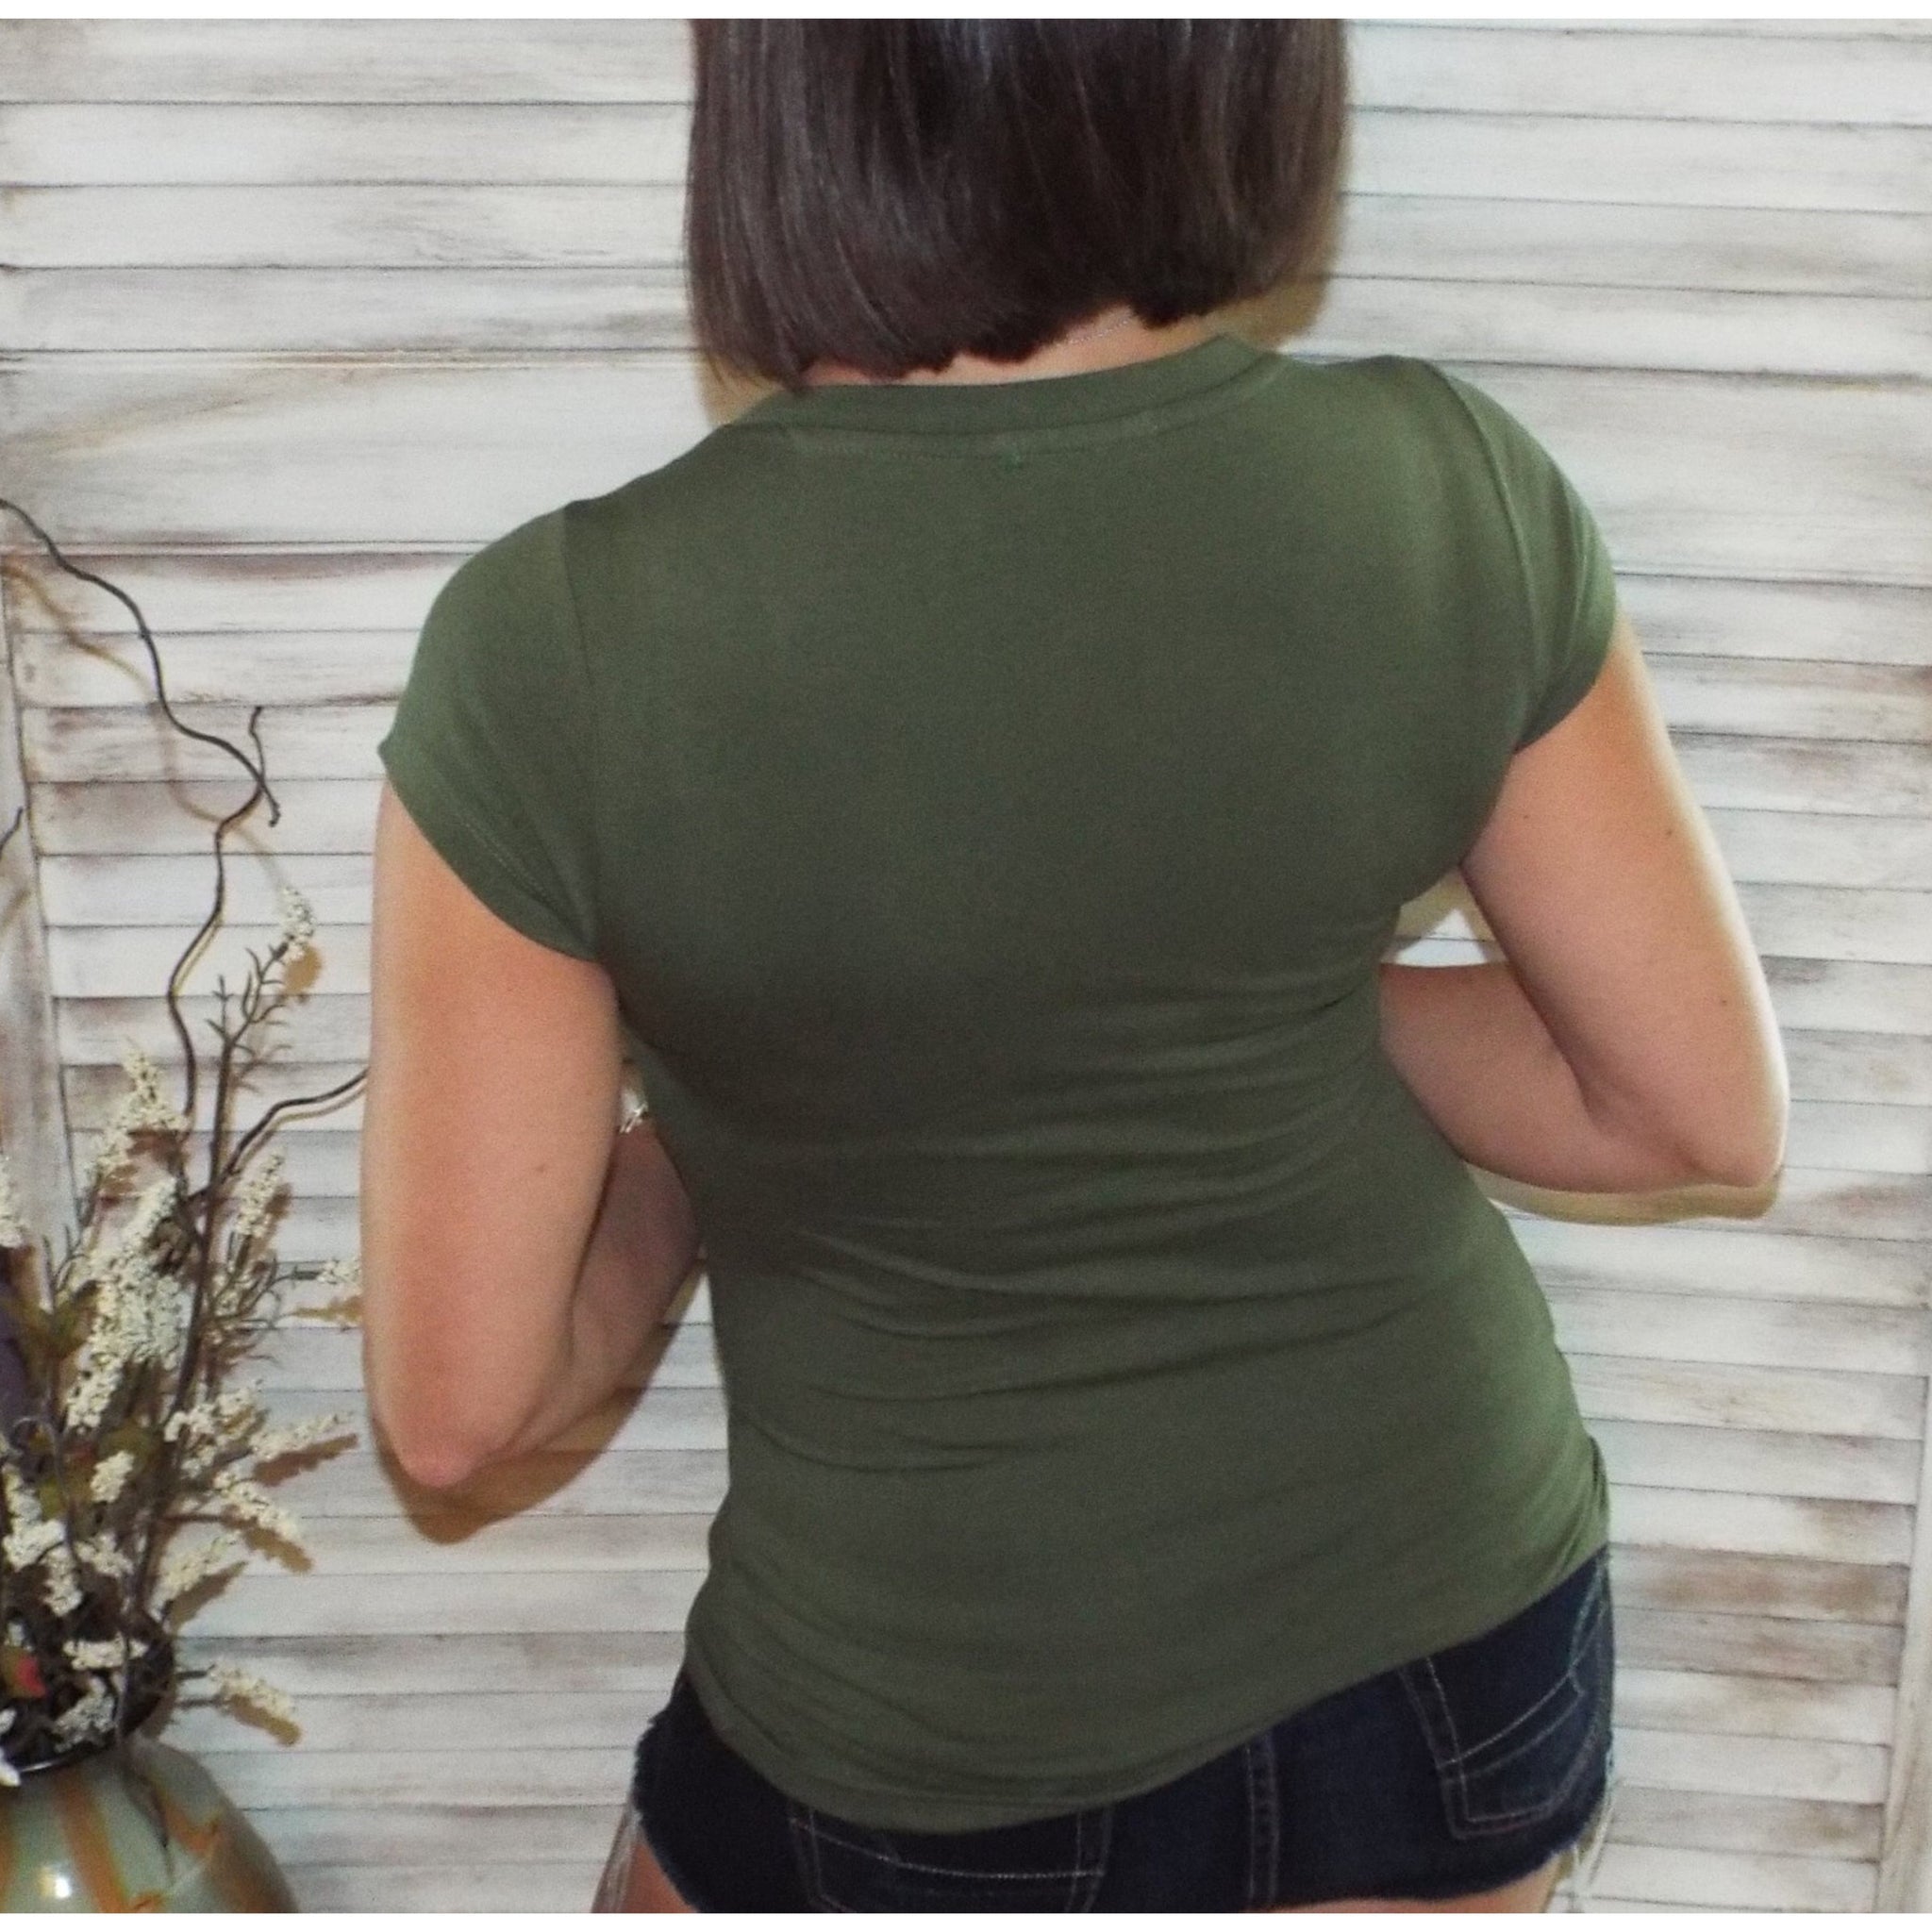 “Basic Babe” Low Cut V Neck Cleavage Baby Slimming Basic Tee Shirt Top Deep Olive